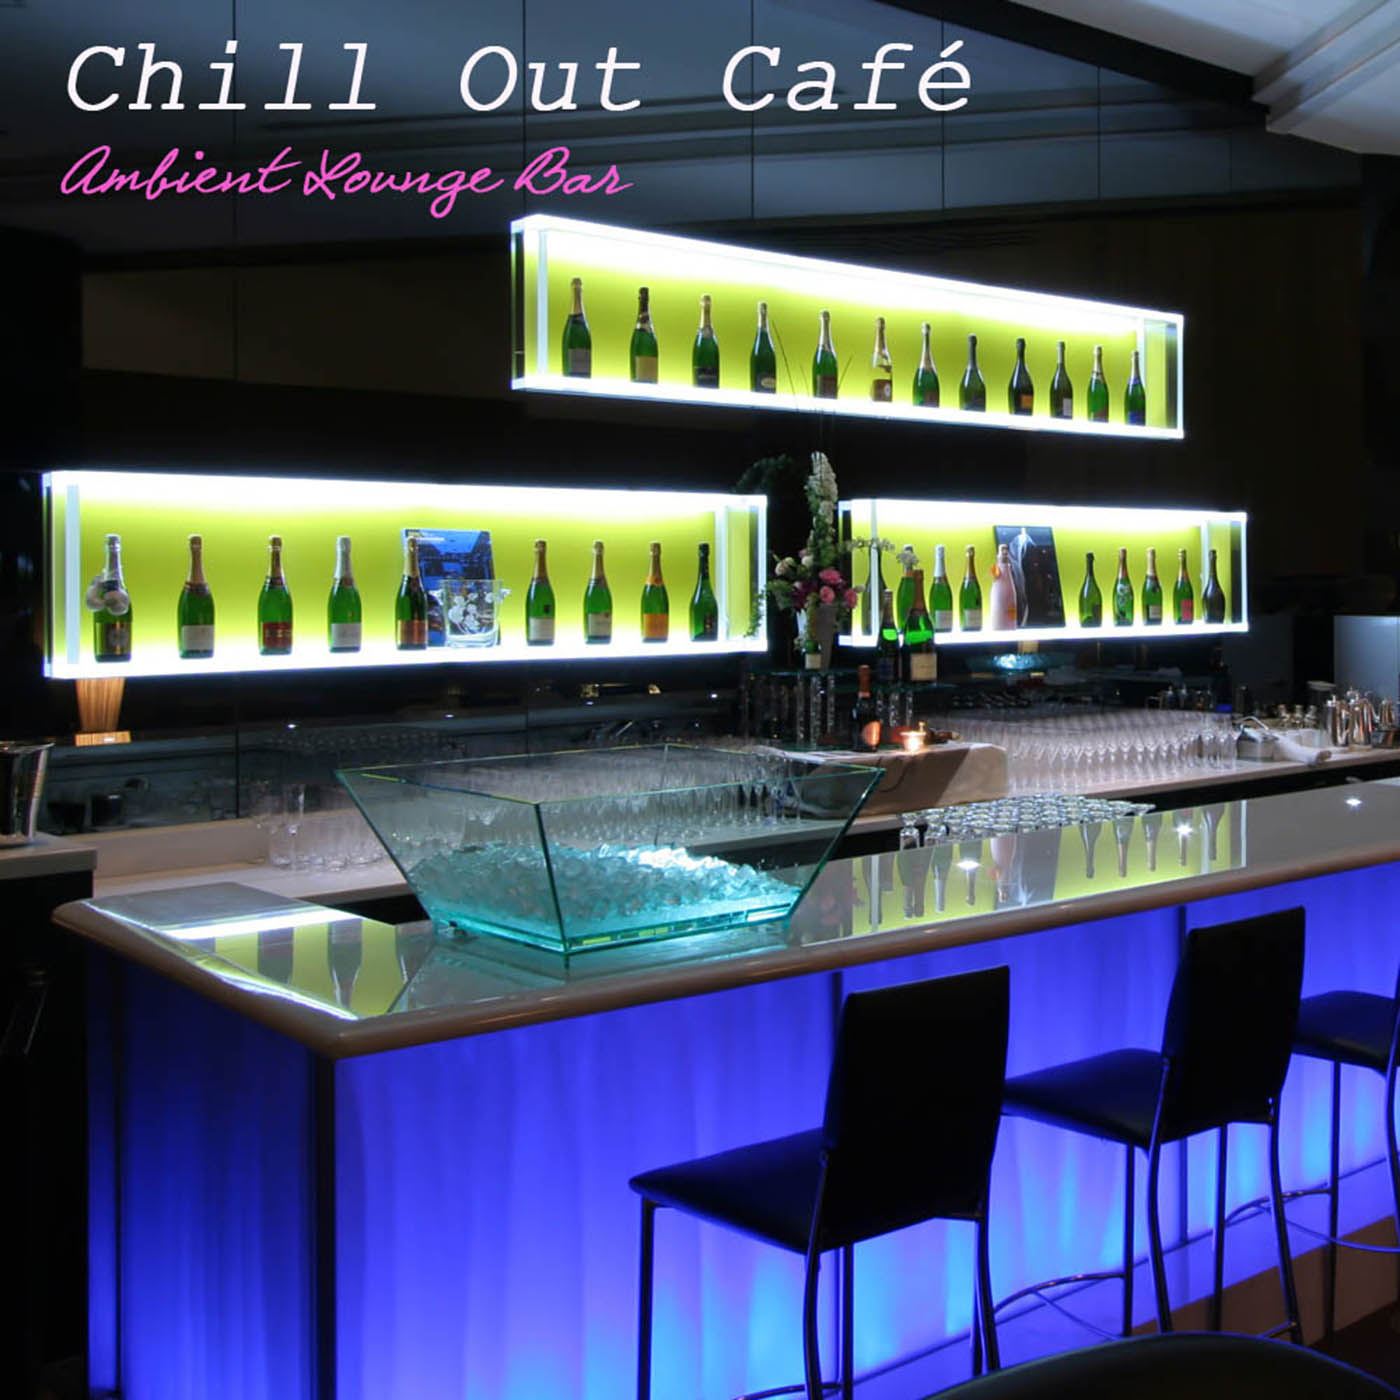 Chill Out Cafe Ambient Lounge Bar: Chillout Music del Mar and Buddha Ambient Music Relax